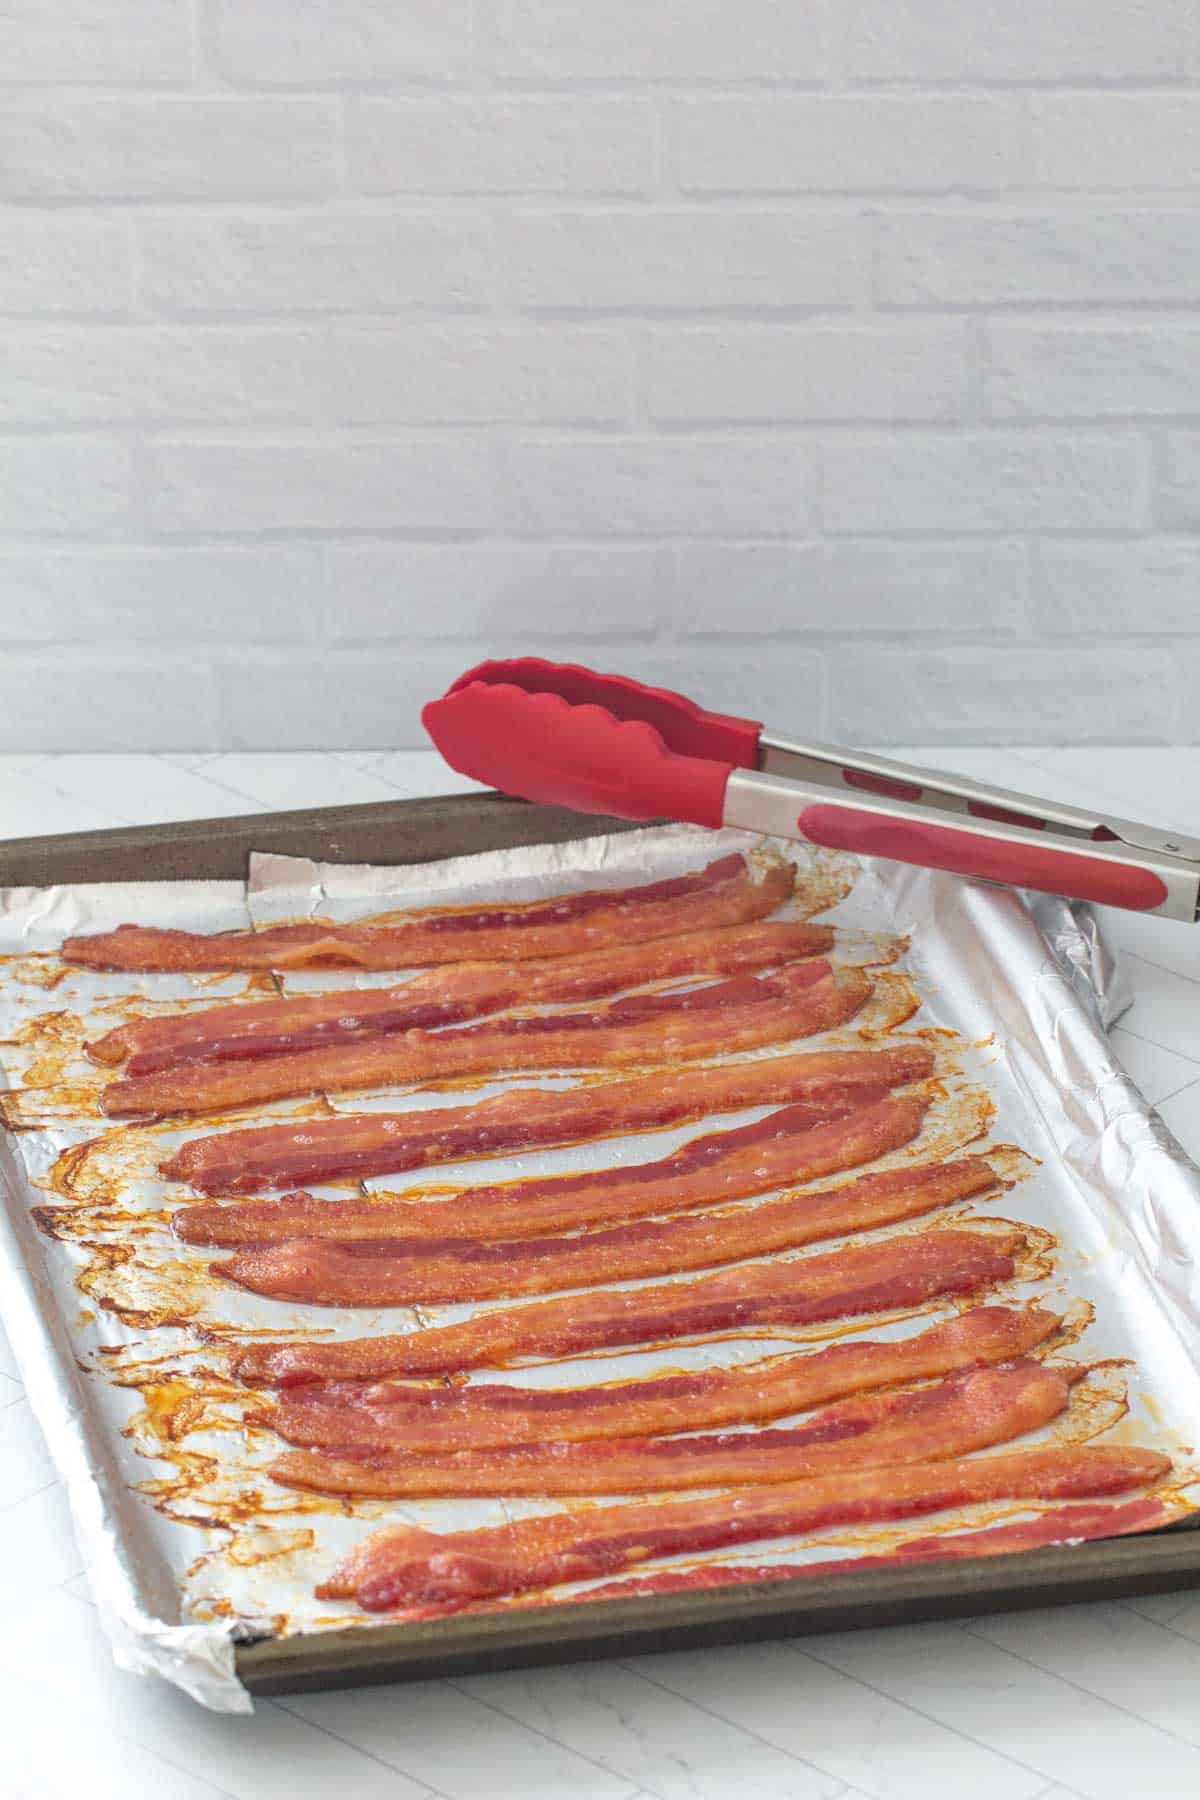 https://www.stetted.com/wp-content/uploads/2022/01/How-to-Bake-Bacon-Photo.jpg